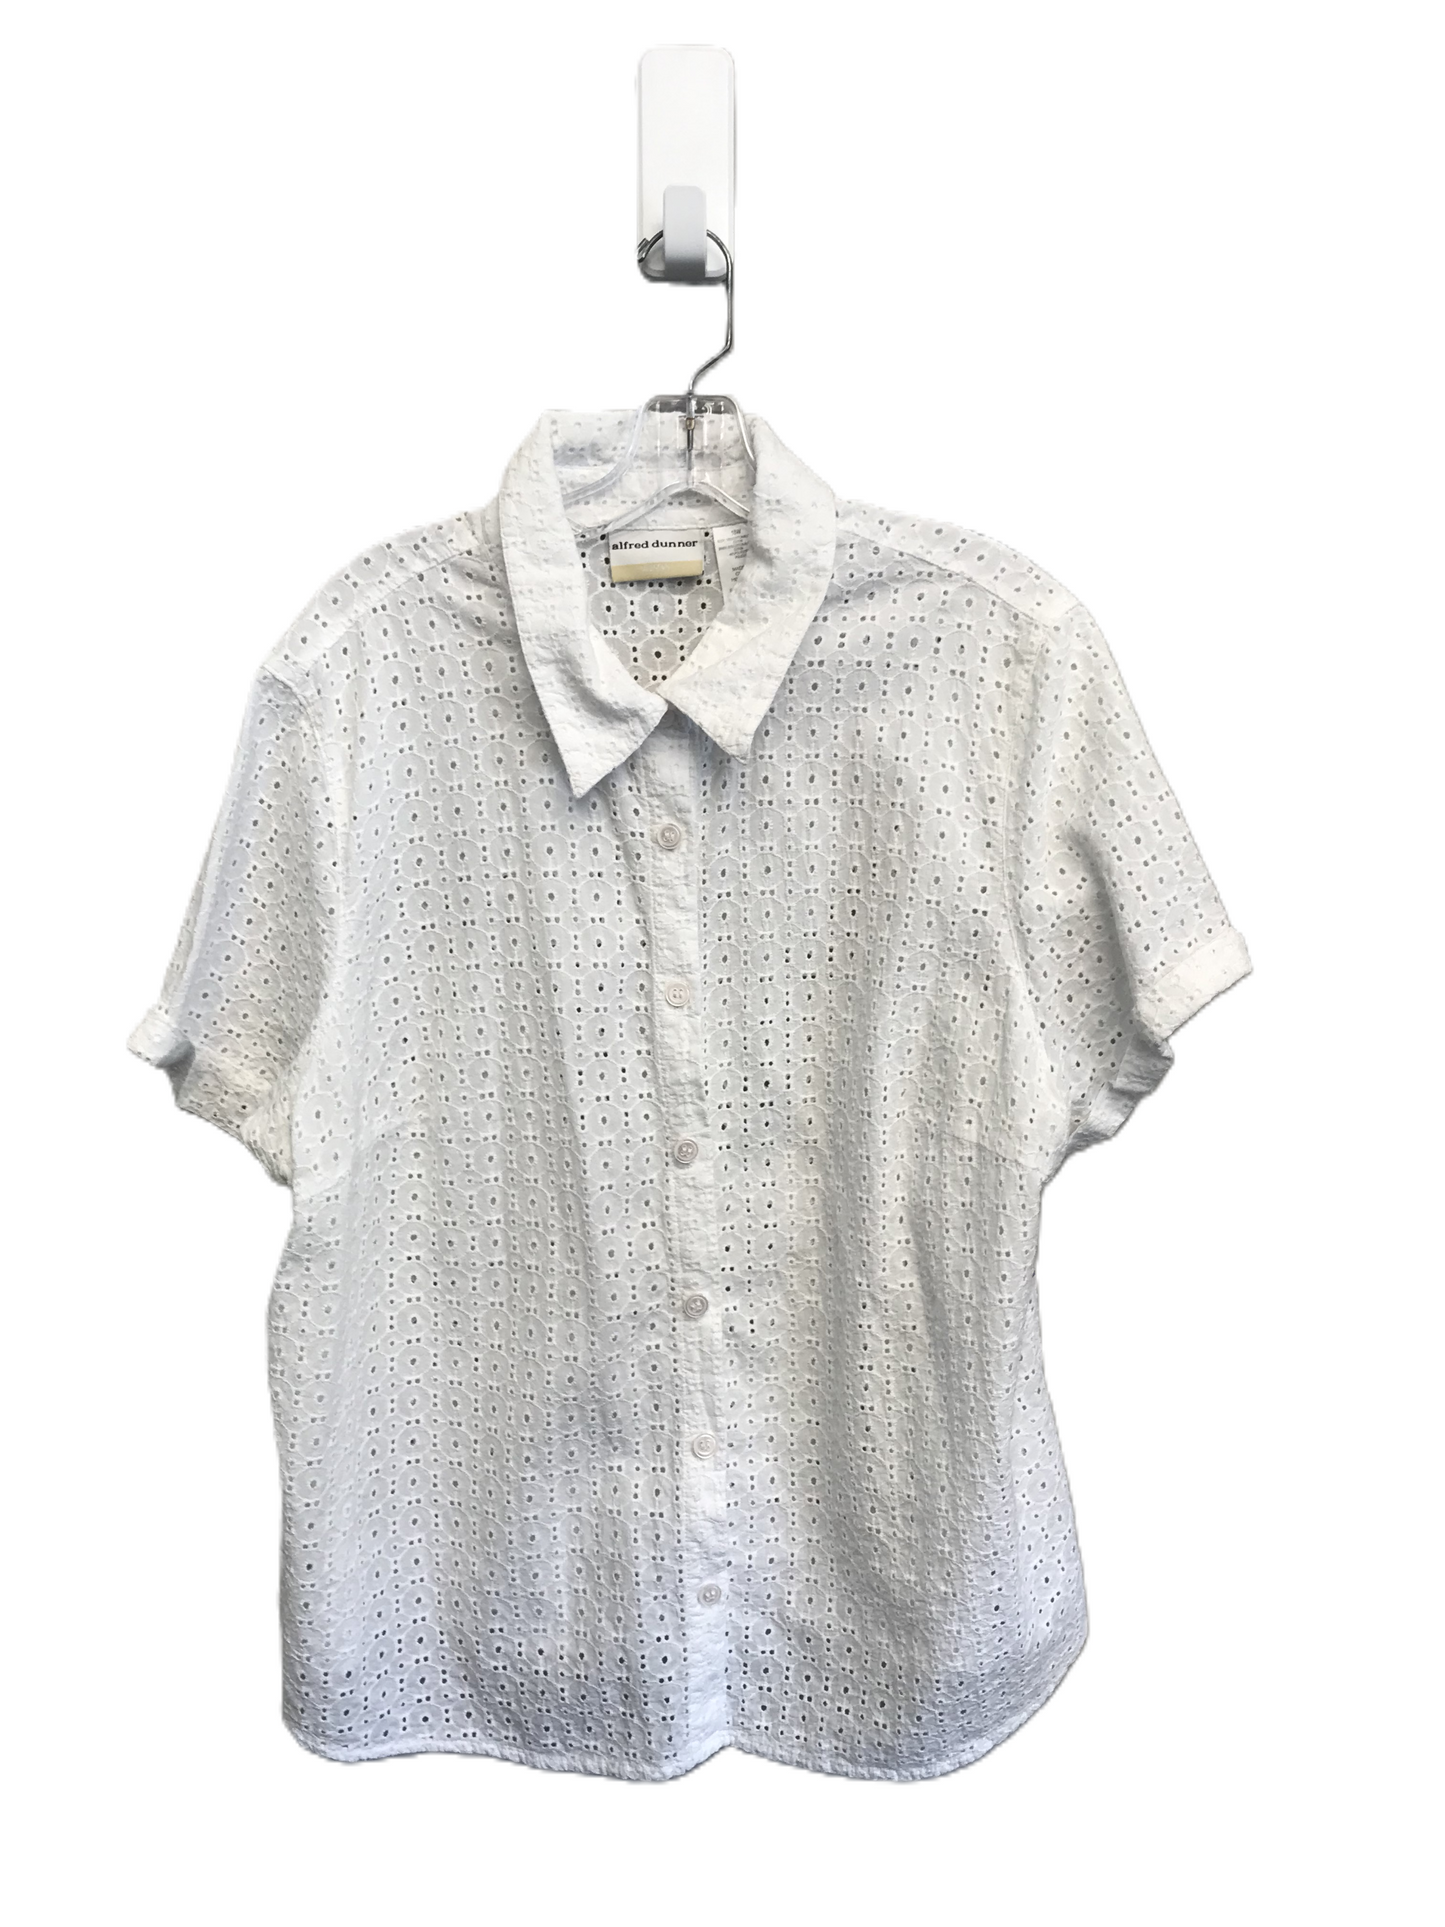 White Top Short Sleeve By Alfred Dunner, Size: 1x